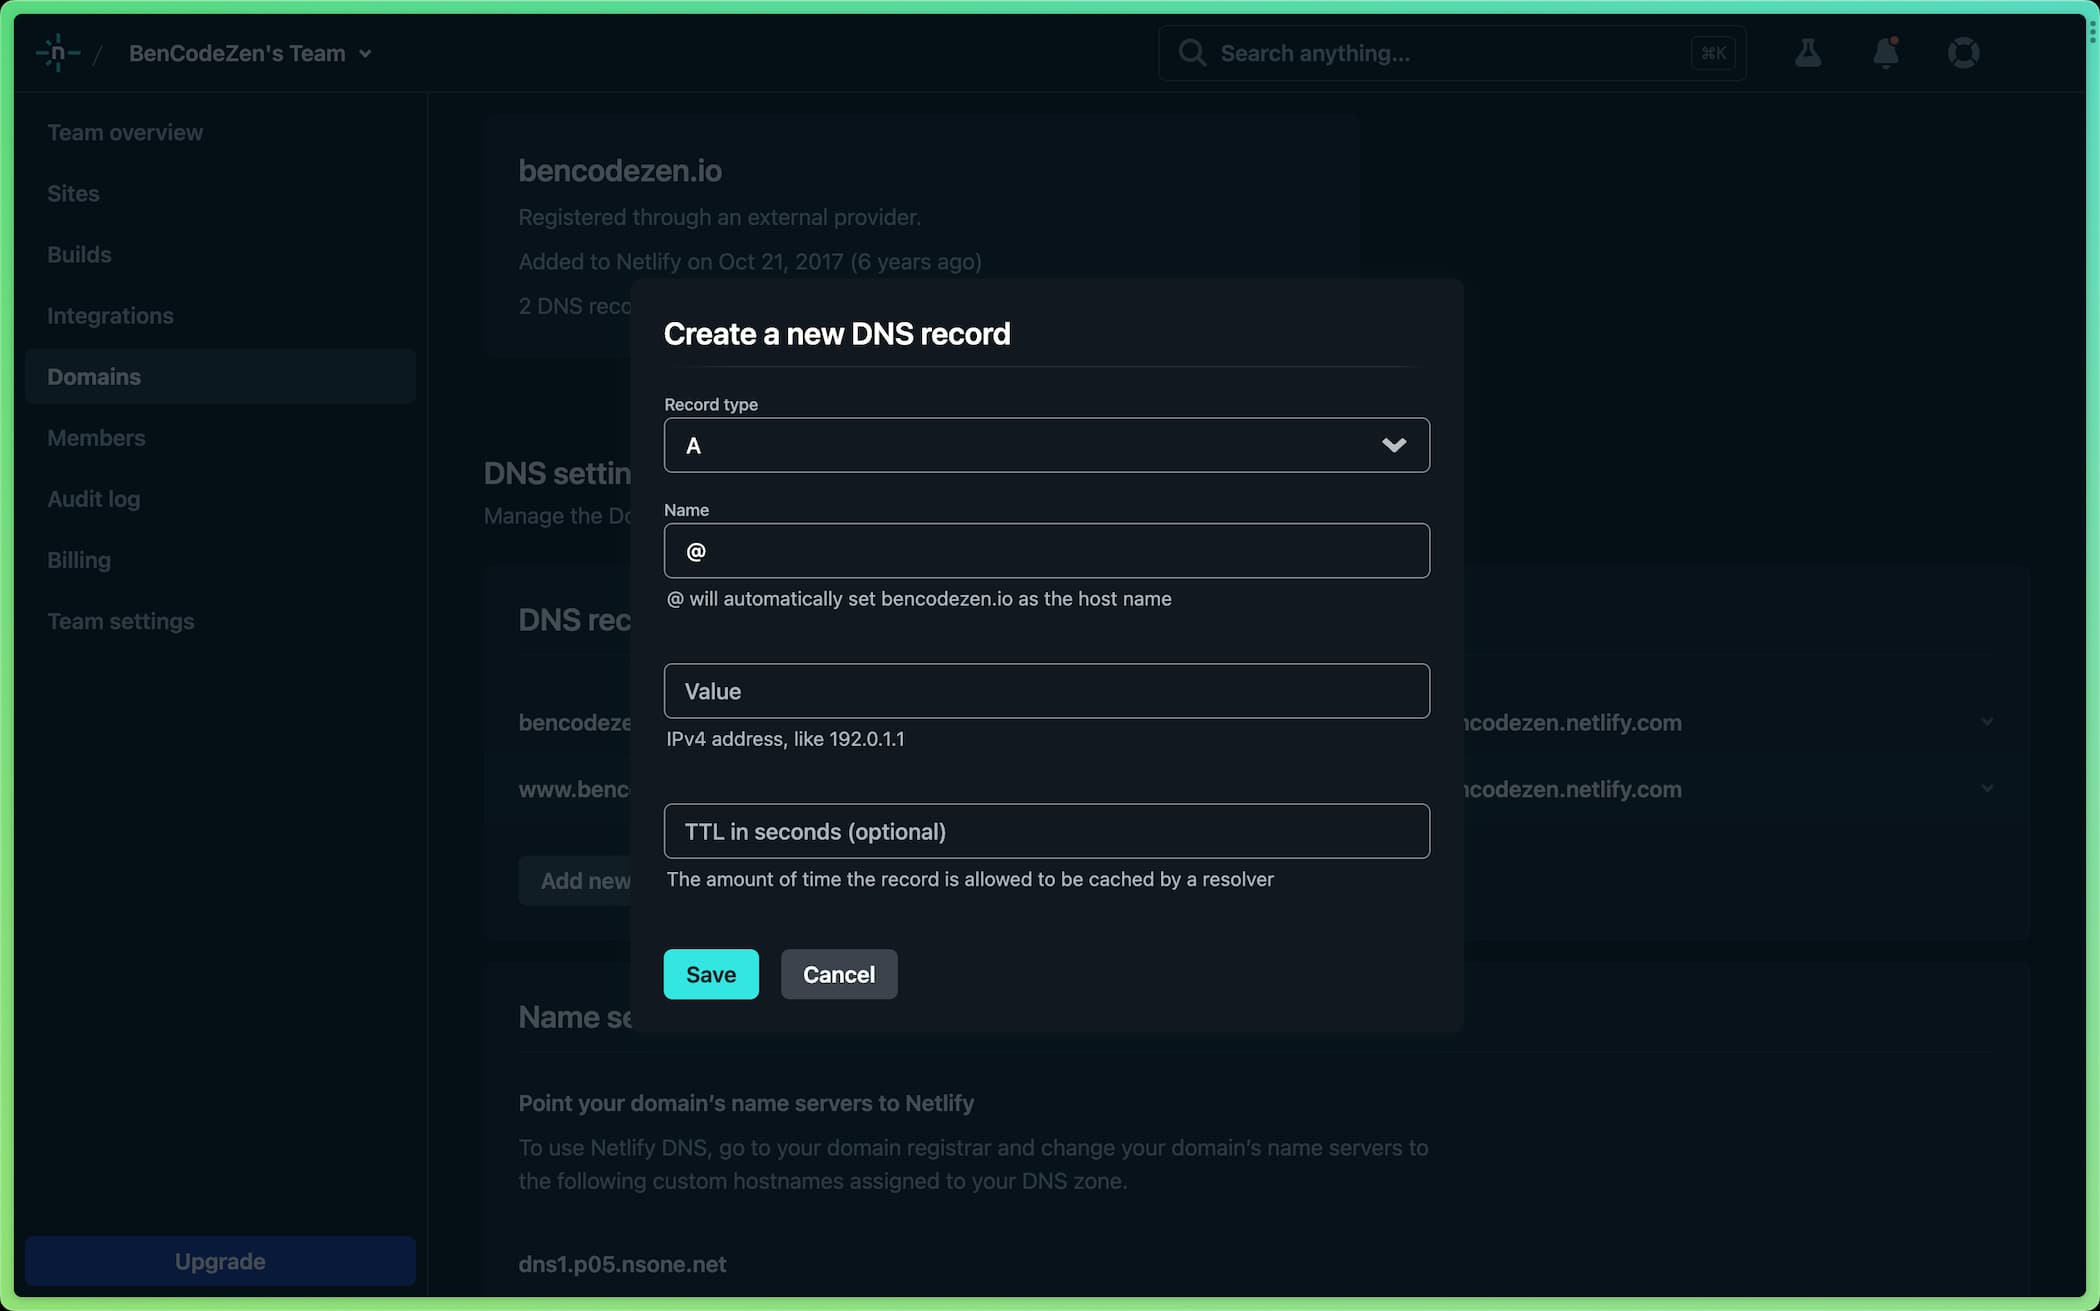 Screenshot of Netlify dashboard that shows the new DNS record form
